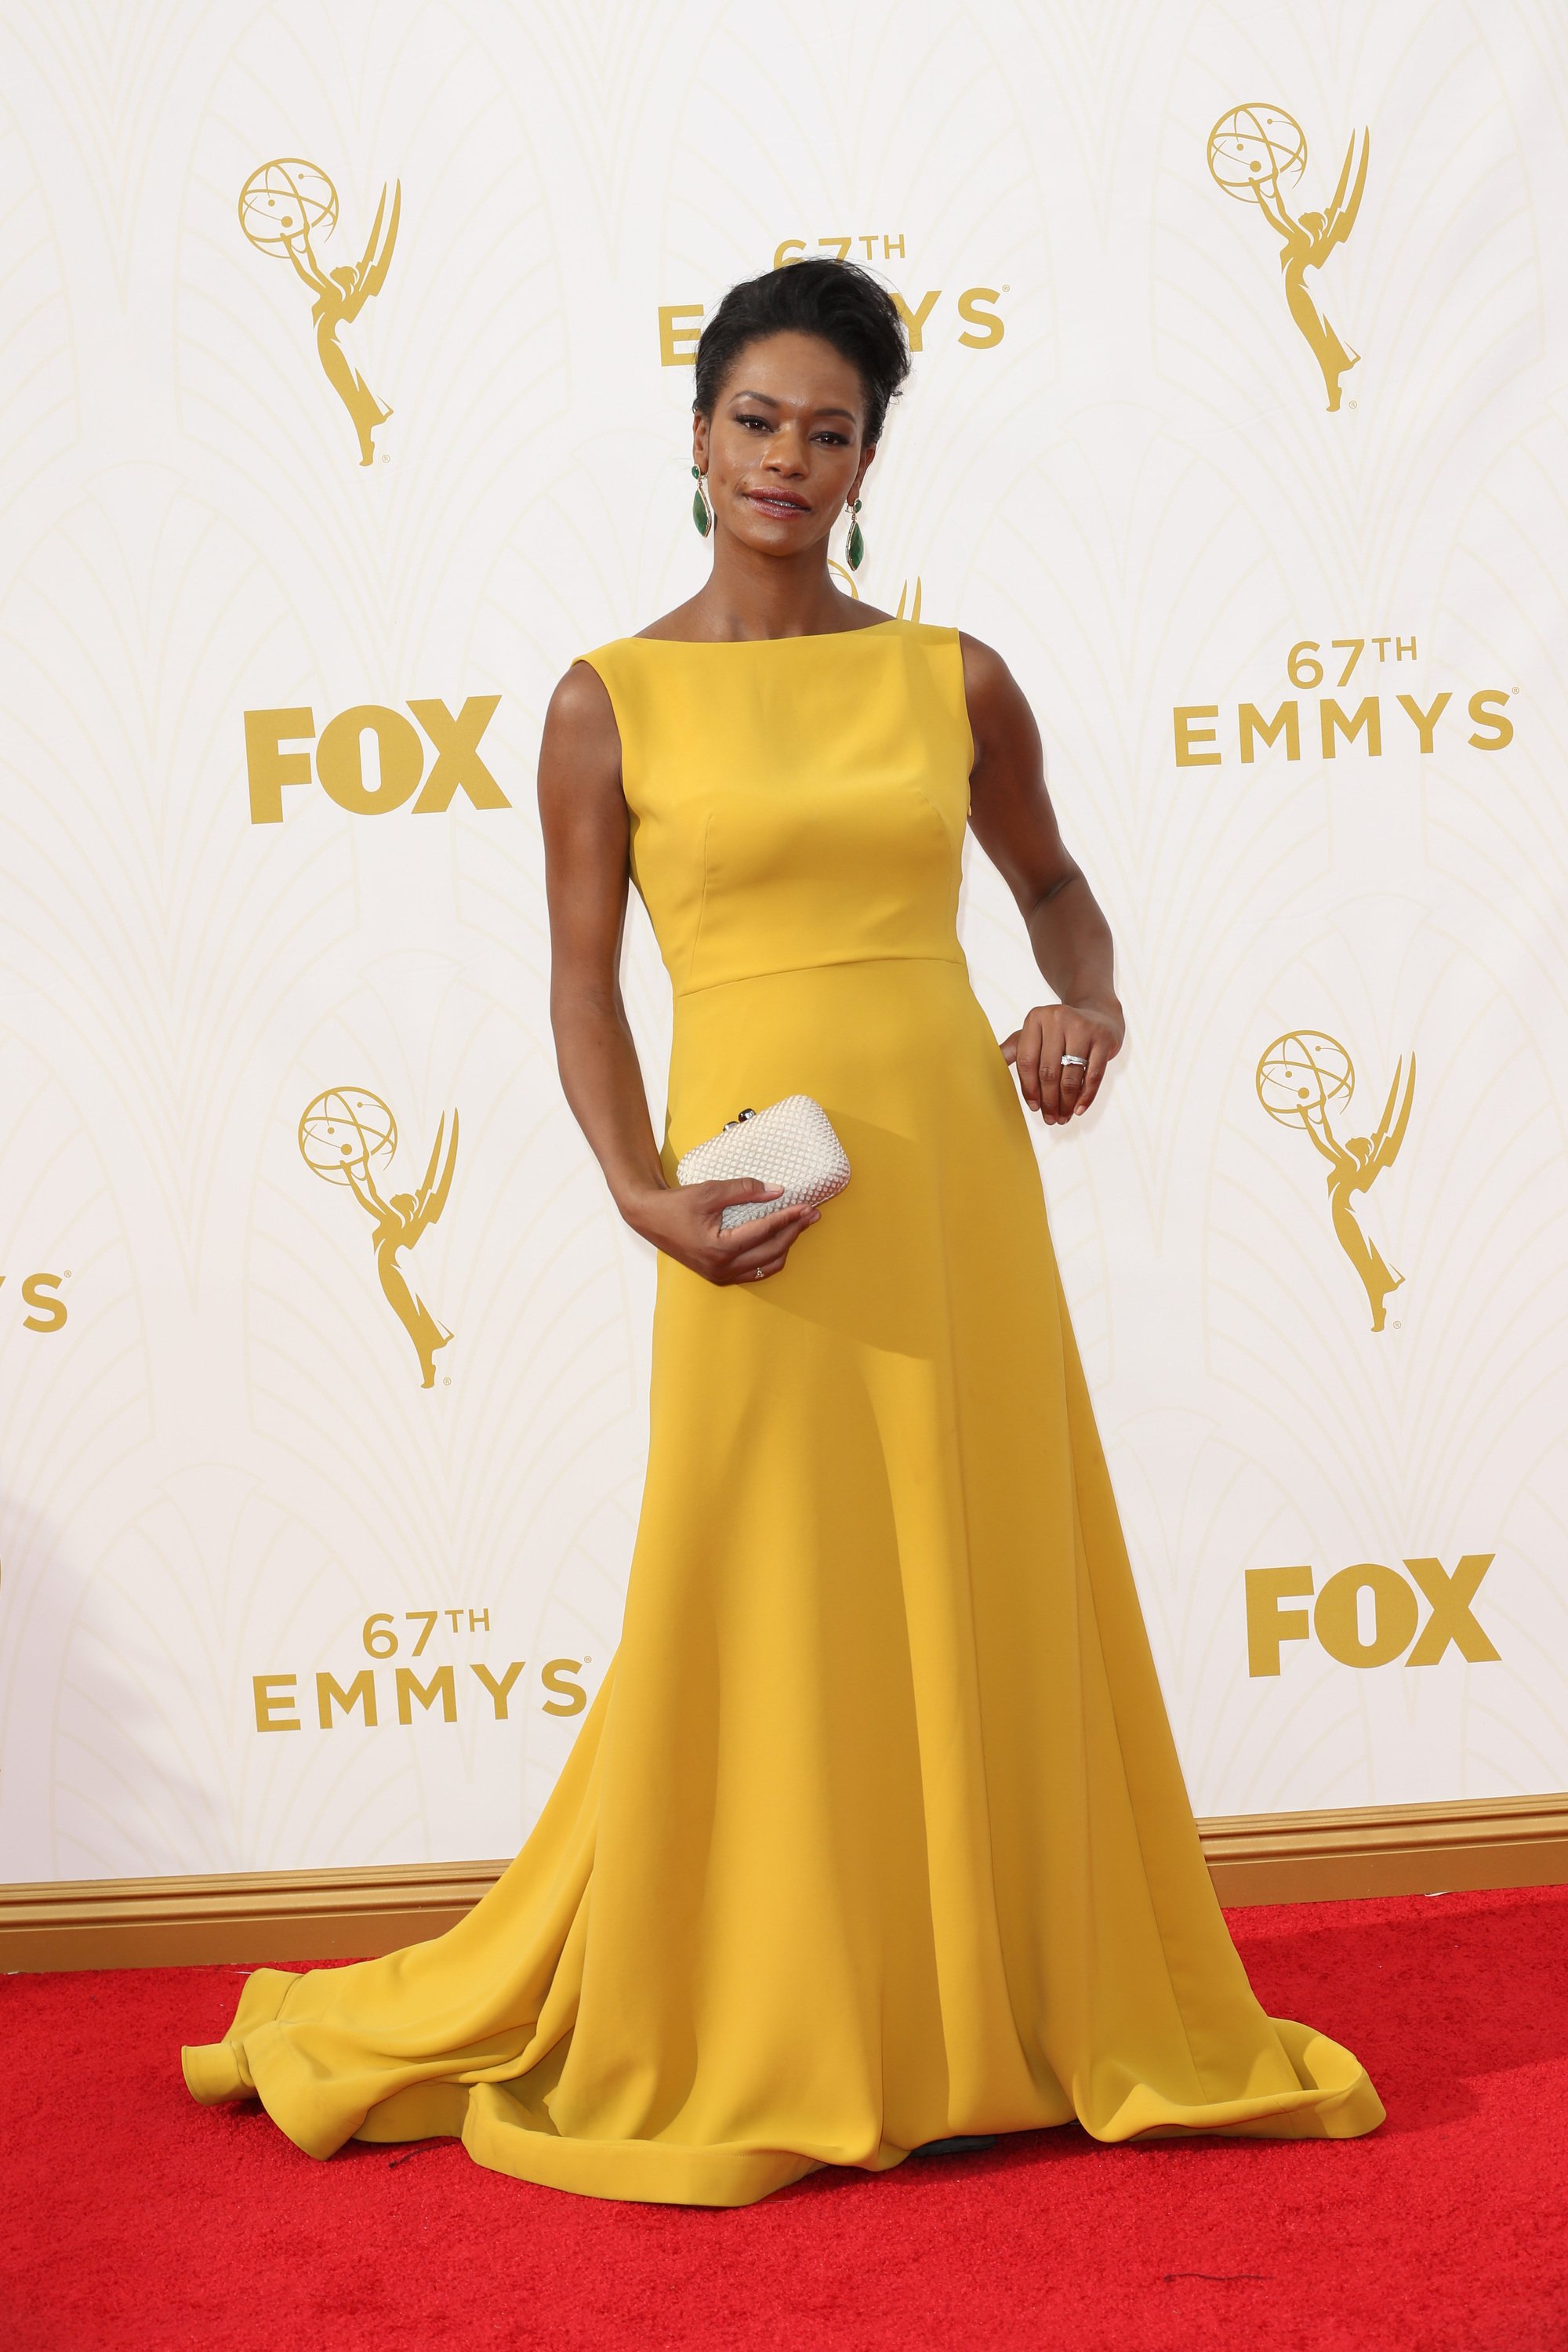 Celebrities arrive at 67th Emmys Red Carpet at Microsoft Theater.

Featuring: Sufe Bradshaw
Where: Los Angeles, California, United States
When: 20 Sep 2015
Credit: Brian To/WENN.com